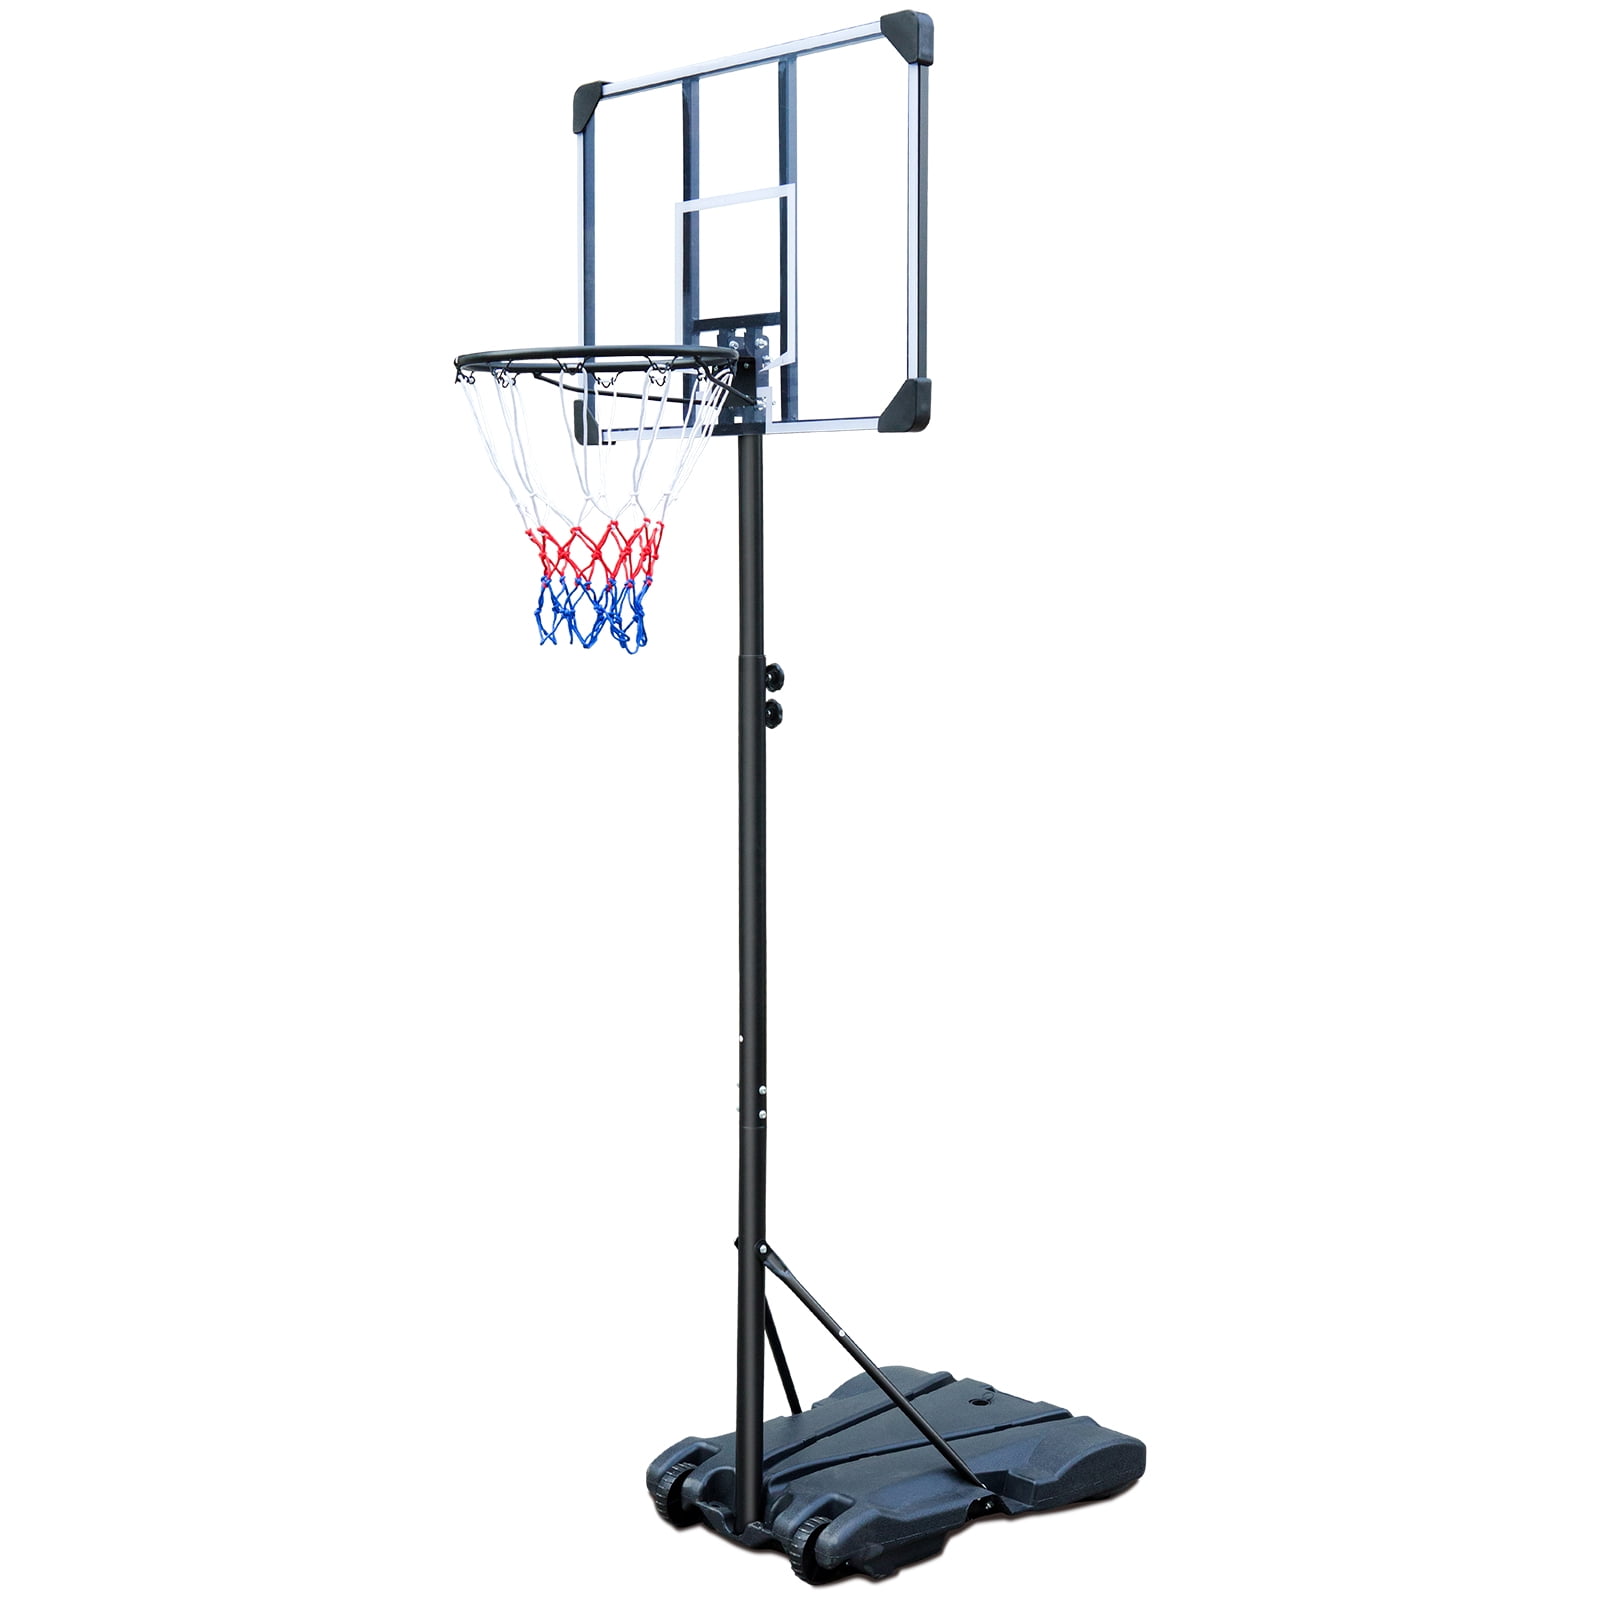 KL KLB Sport Portable Basketball Hoop Backboard System Stand Height Adjustable 6.5ft 10ft with 44 Inch Backboard and Wheels for Youth Kids Indoor Outdoor Basketball Goal Game Play Set 